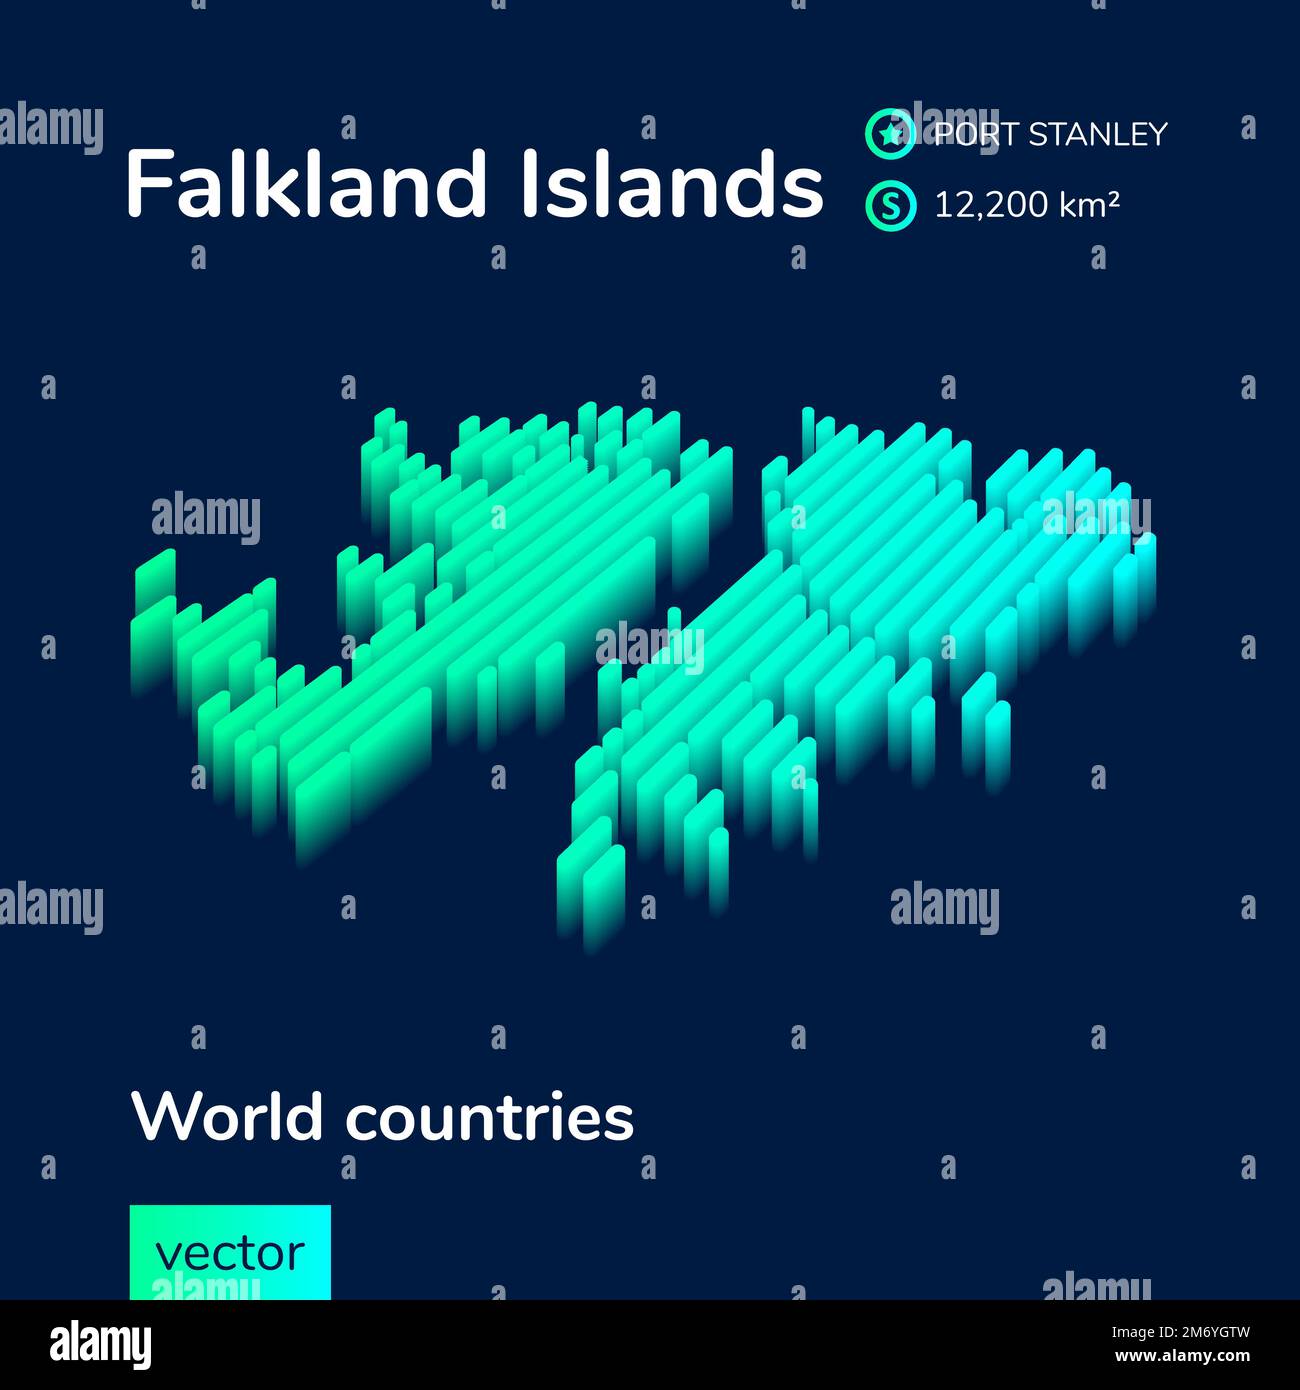 https://c8.alamy.com/comp/2M6YGTW/falkland-islands-3d-map-stylized-striped-neon-digital-isometric-vector-map-of-falkland-islands-is-in-green-and-mint-colors-on-the-dark-blue-2M6YGTW.jpg